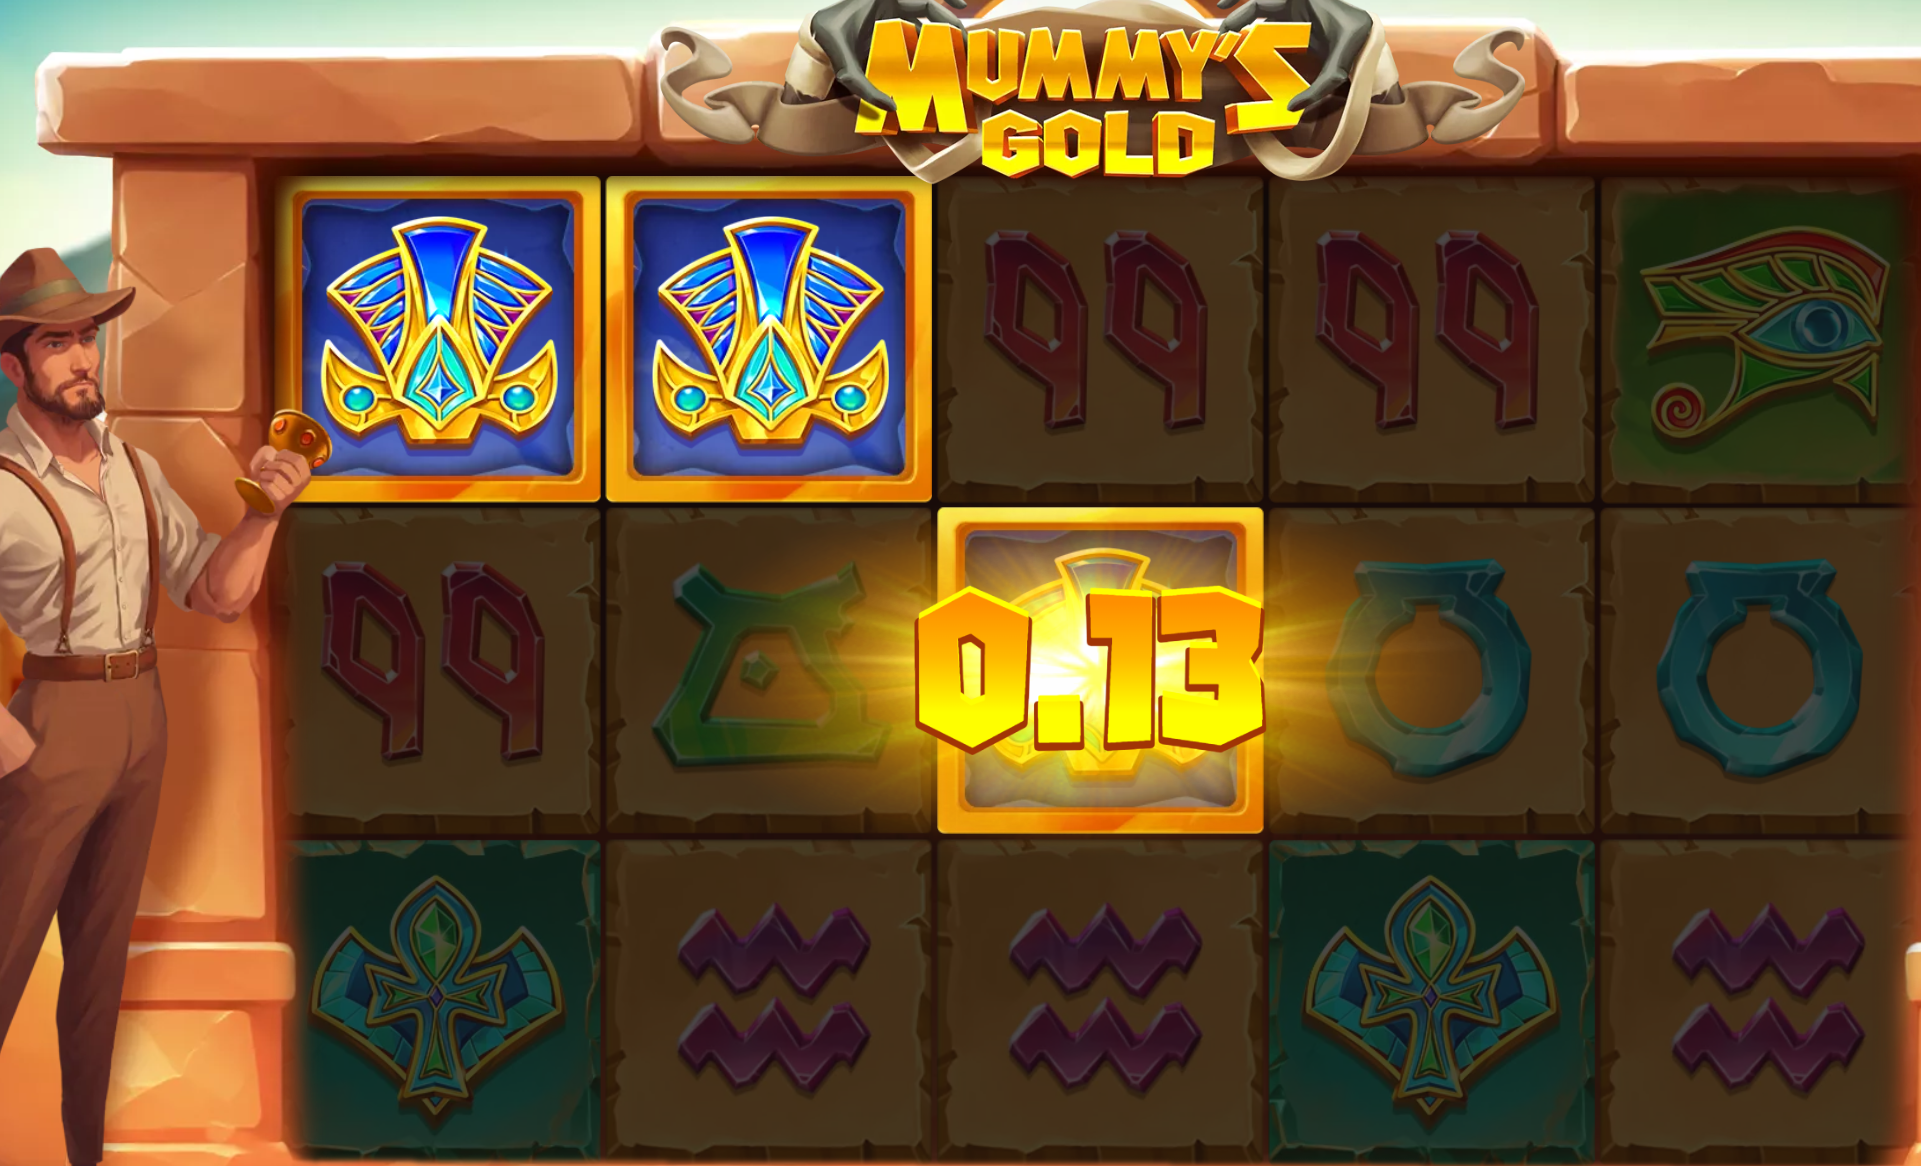 A correct prediction of color doubles the winnings in Mummy's Gold Slot